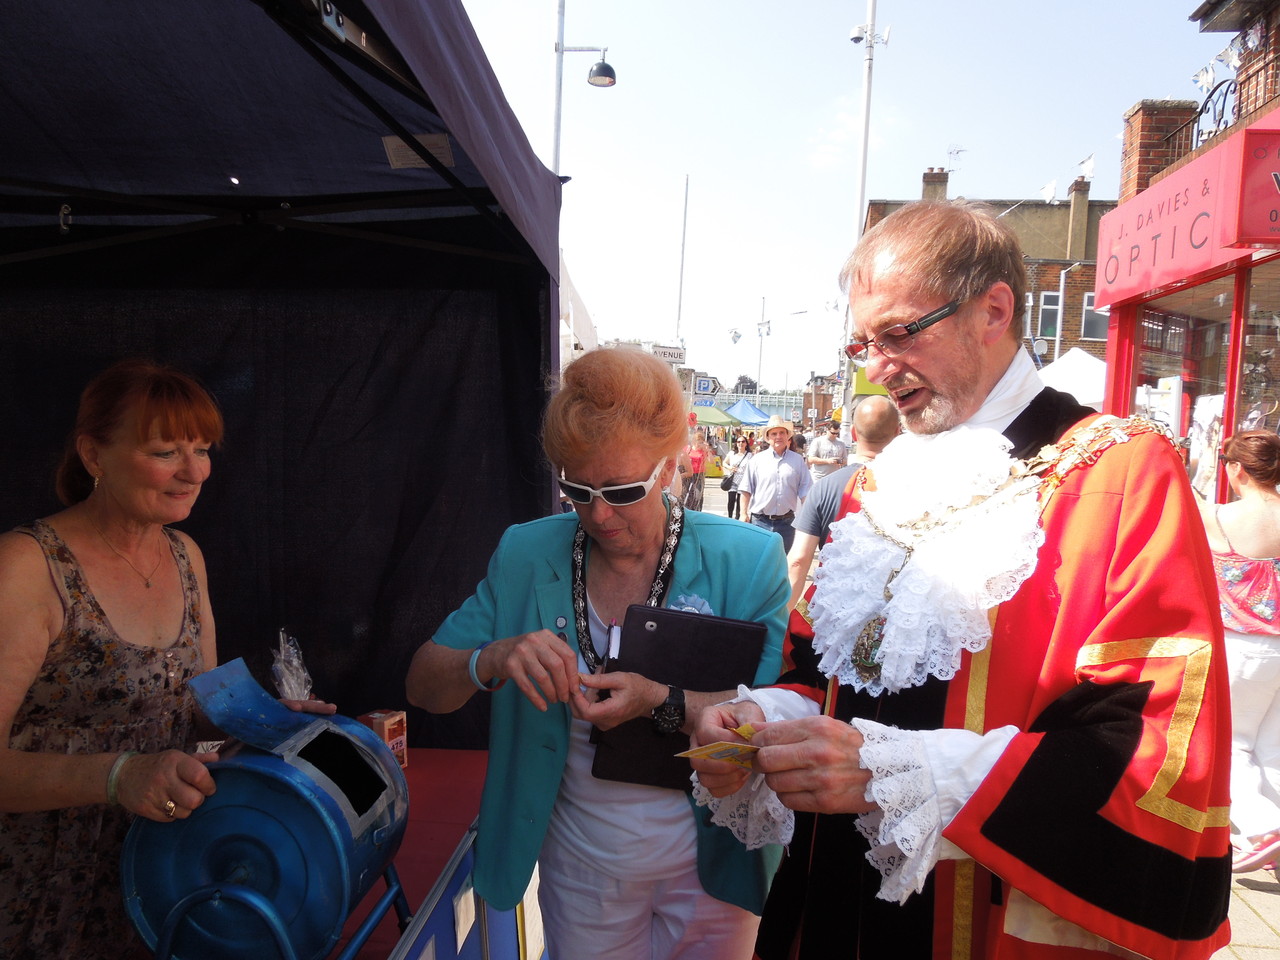 The mayor and mayoress - they didn't win!